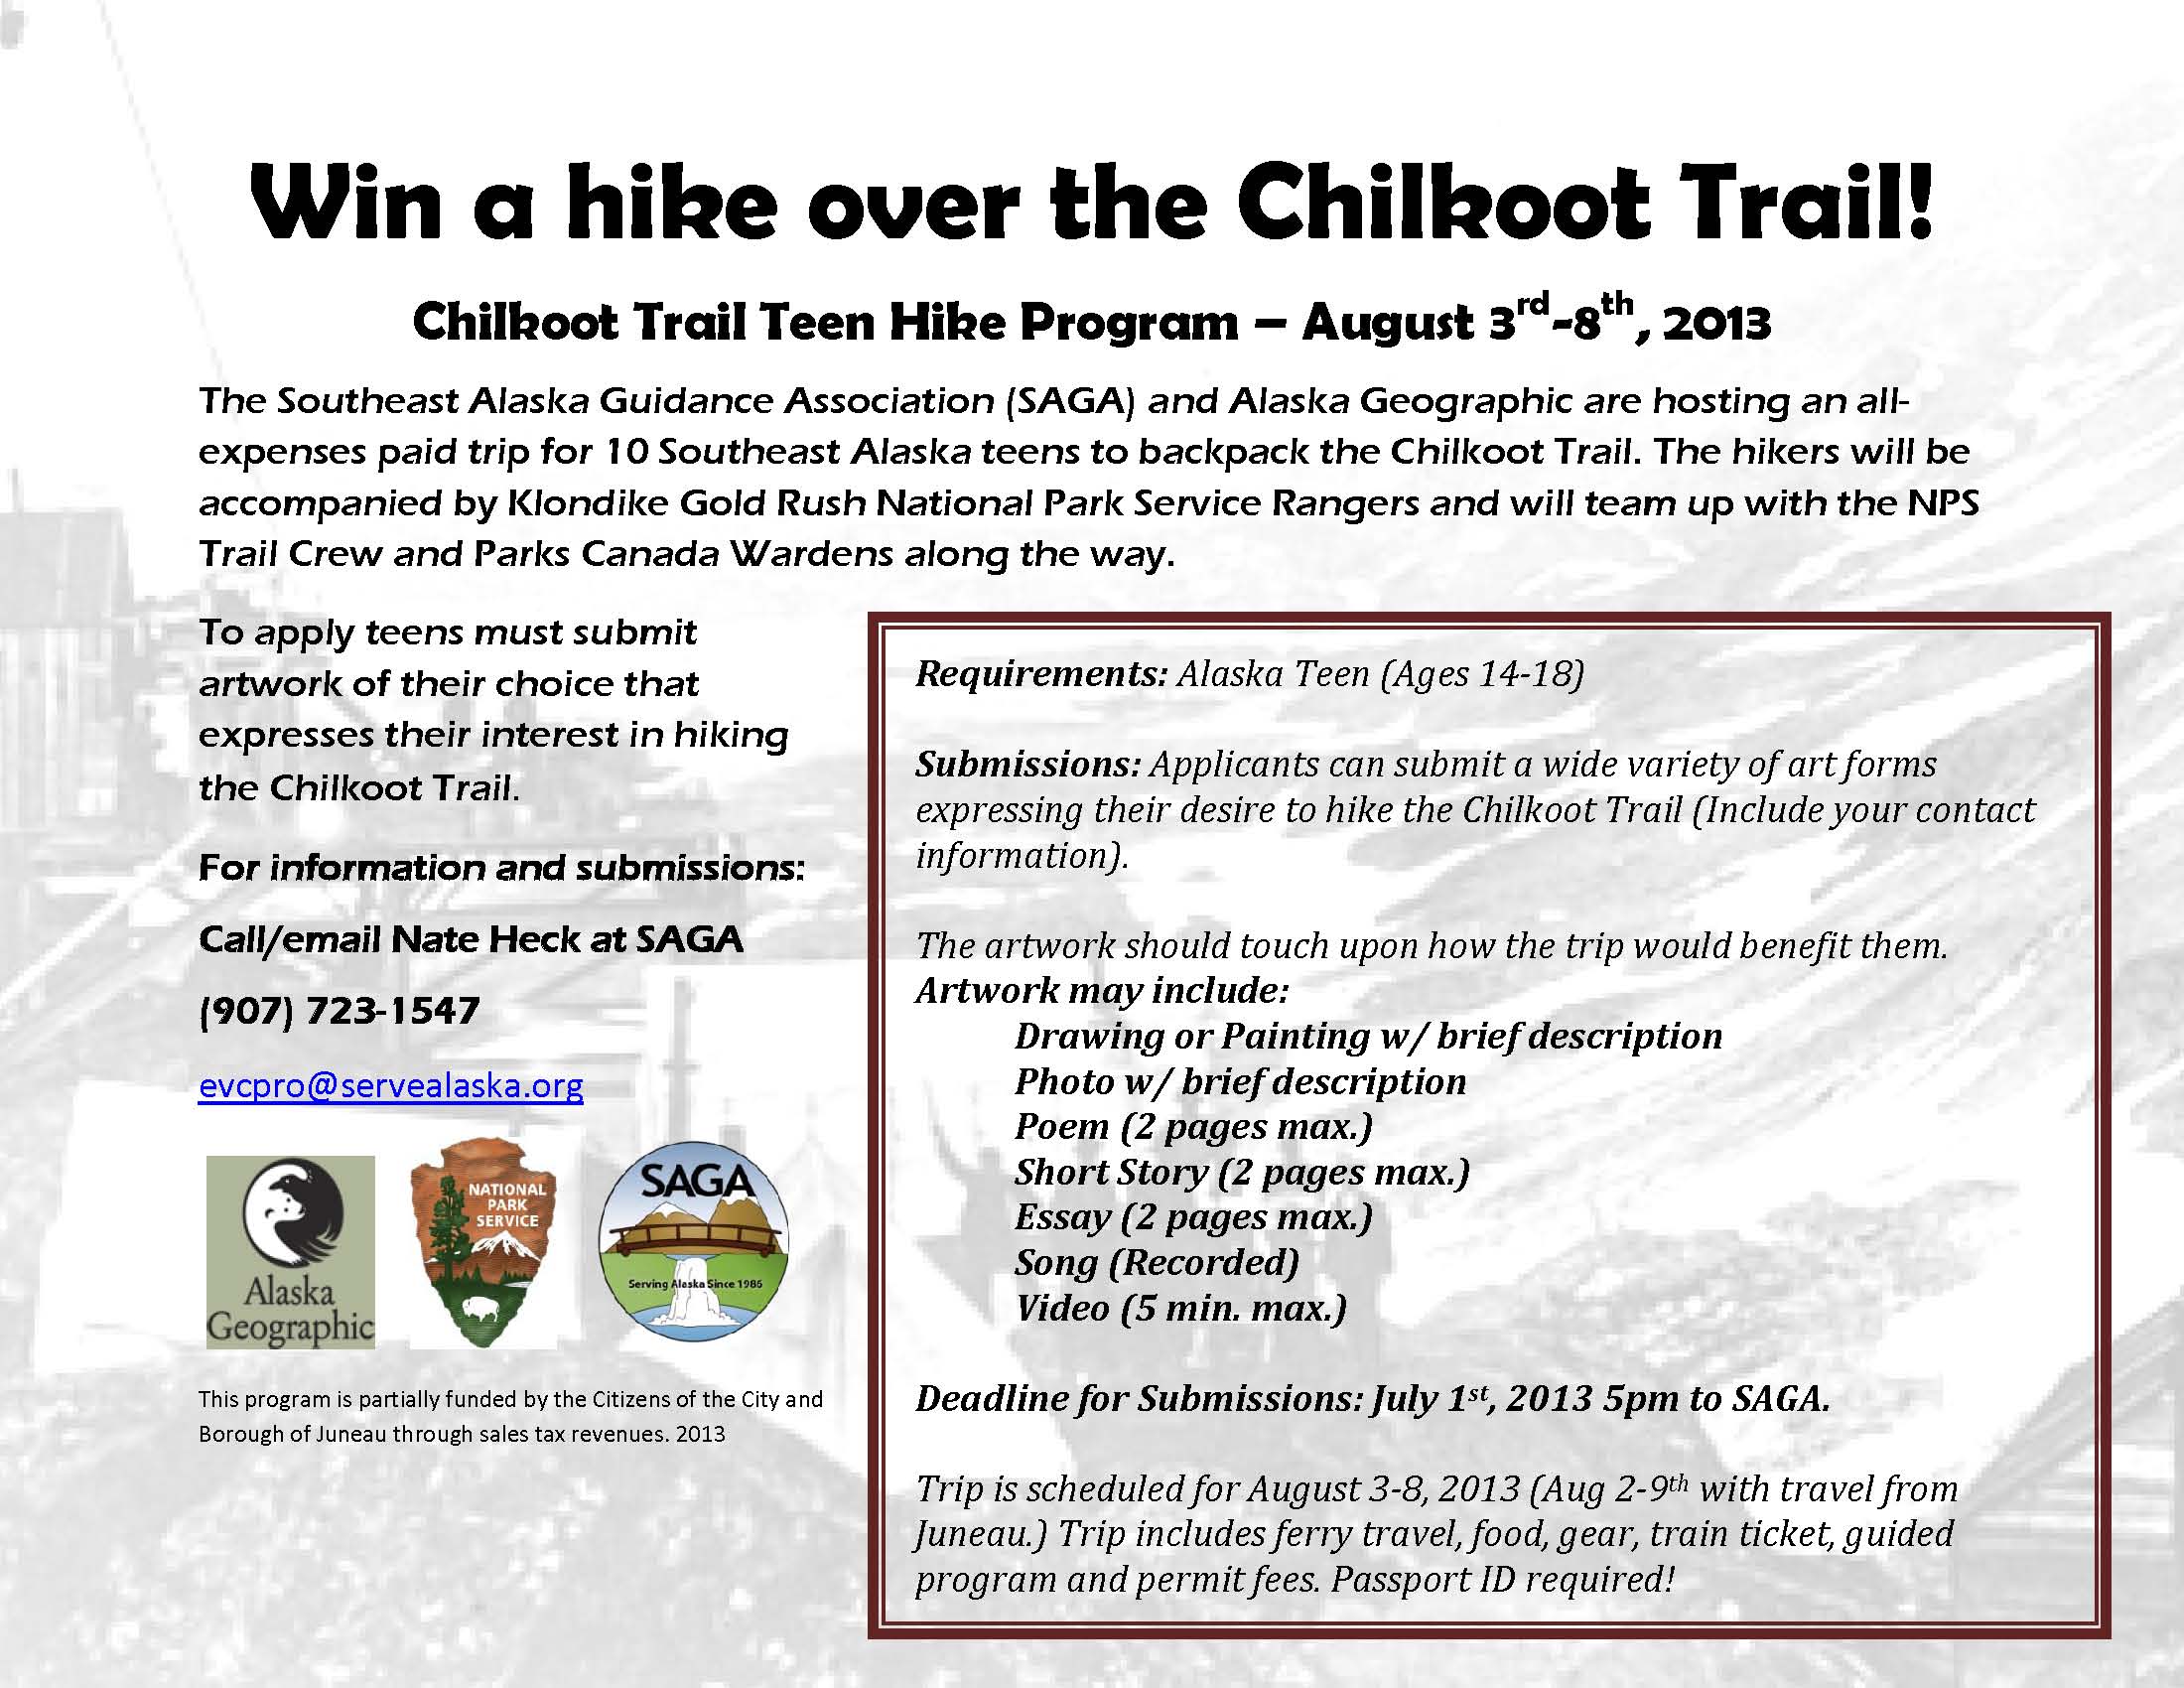 Win a hike over the Chilkoot Trail 2013